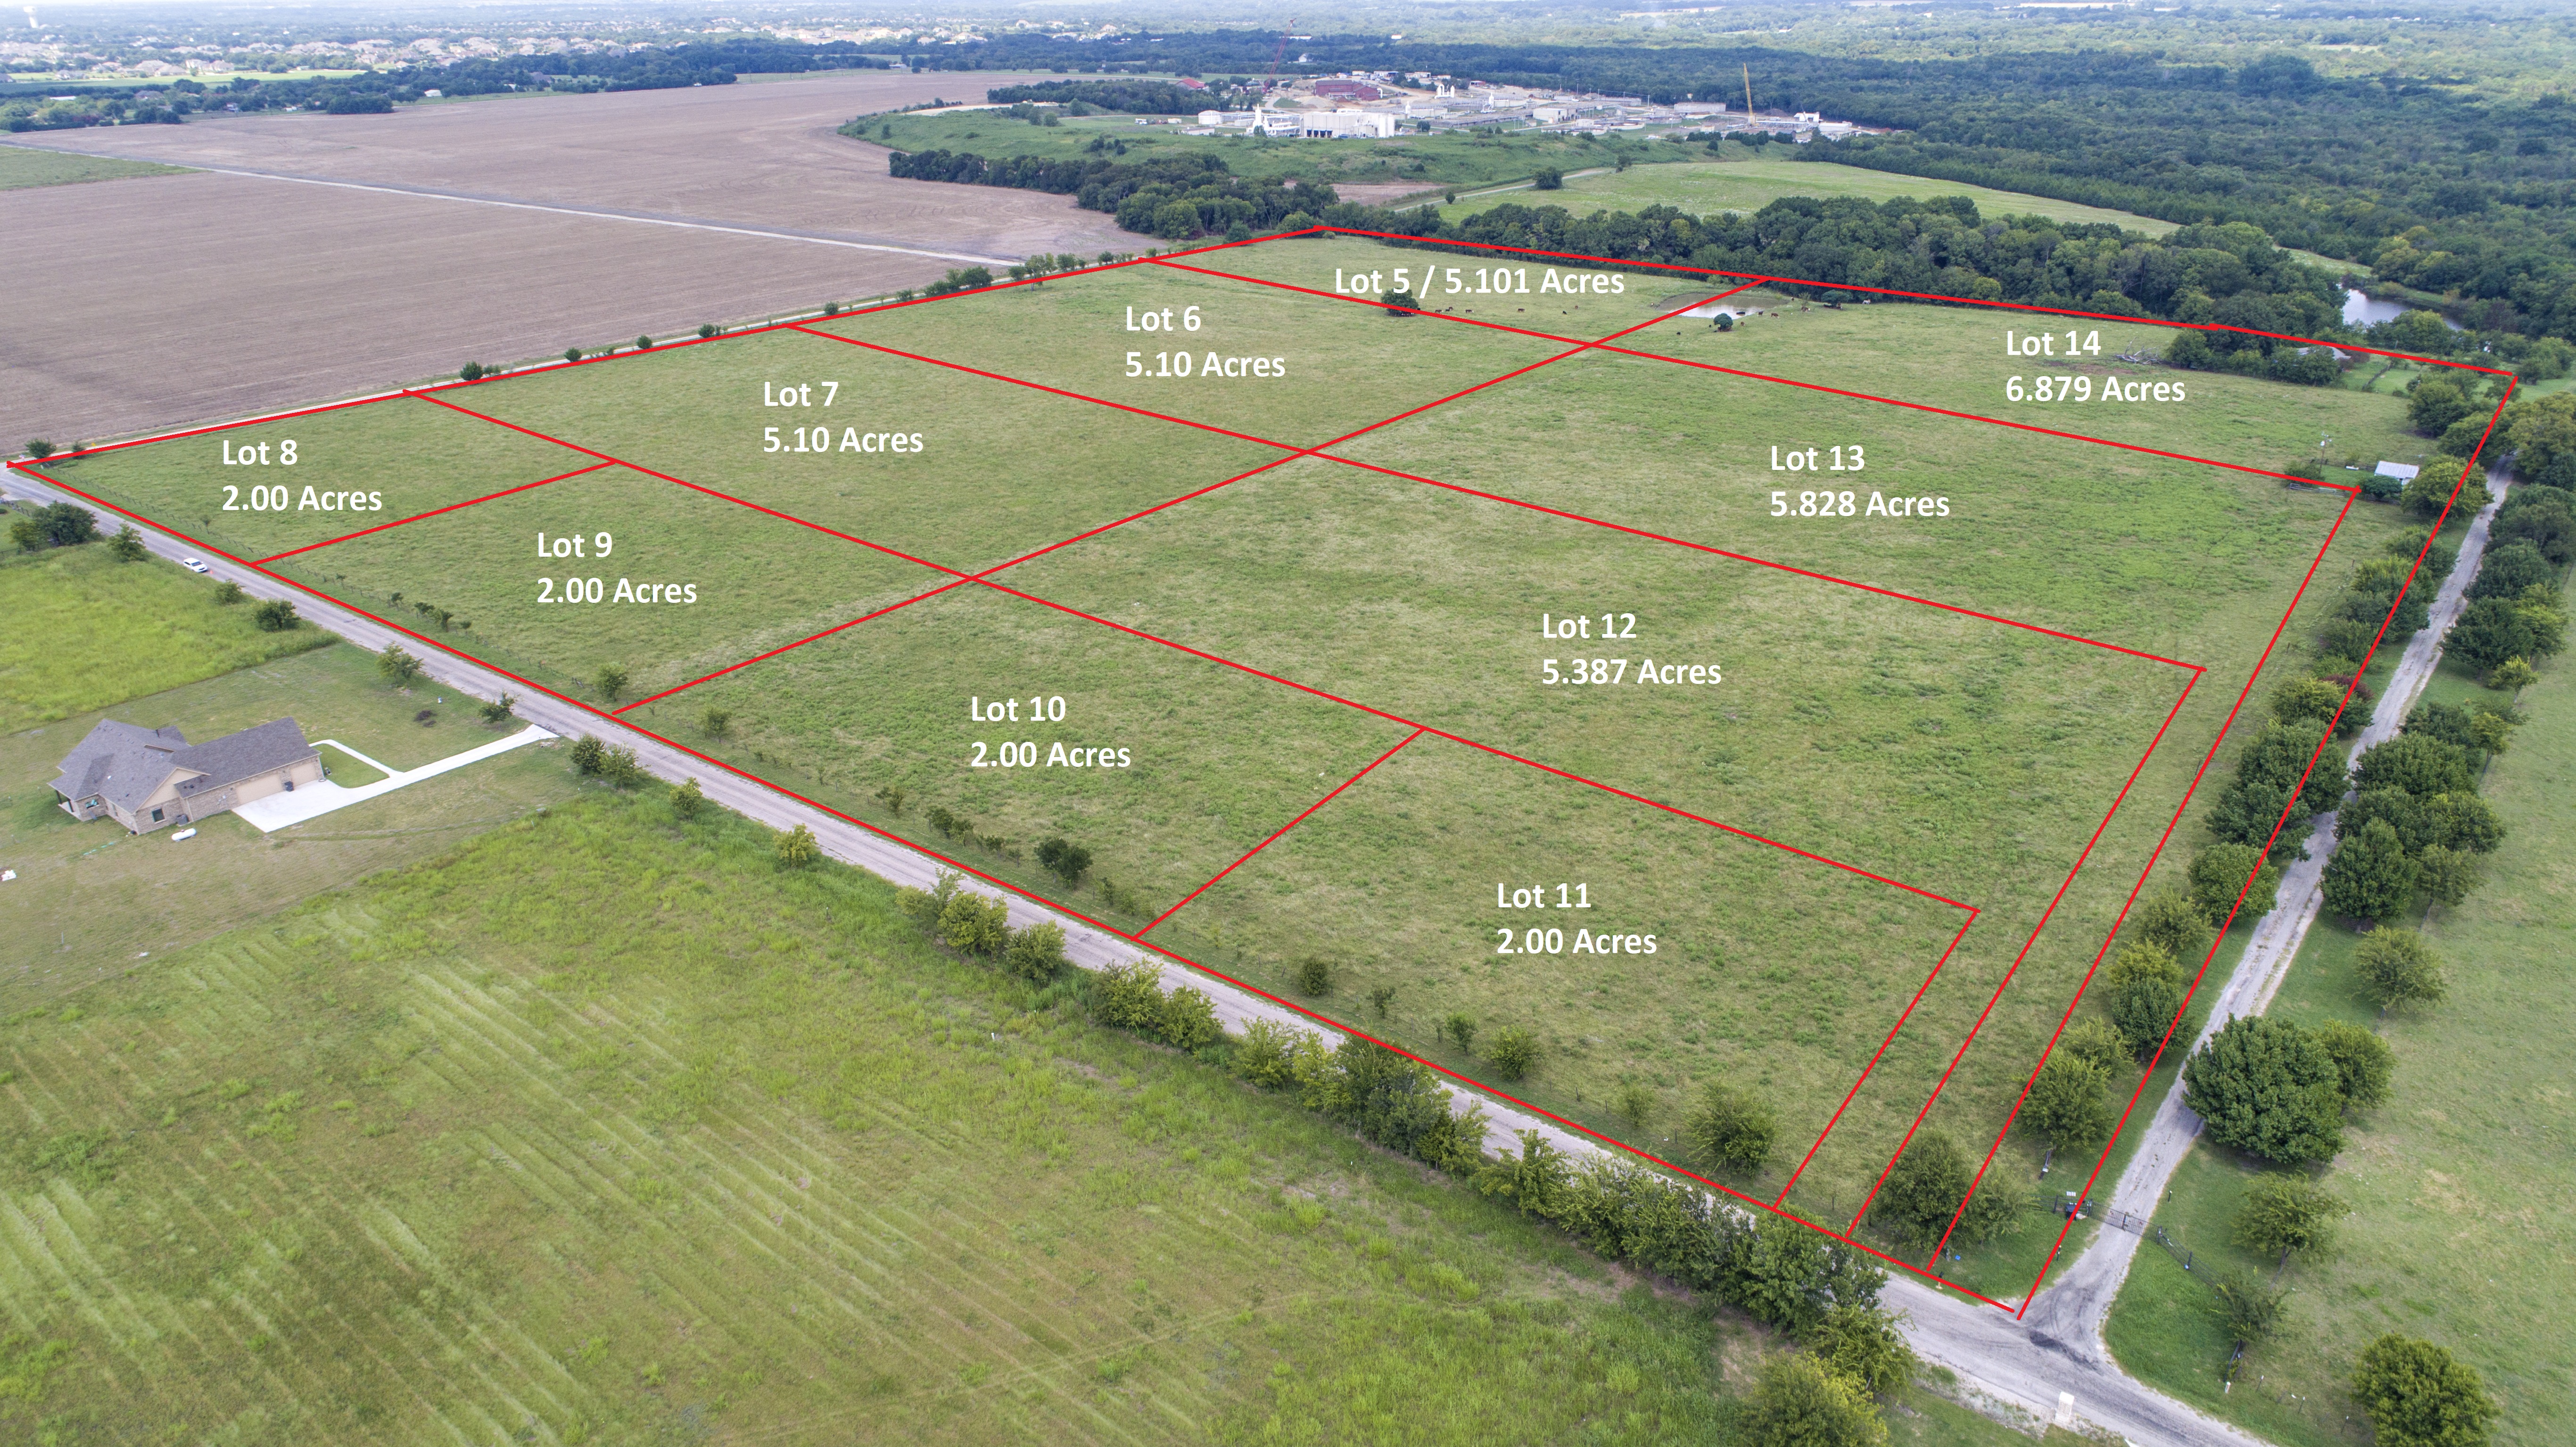 1 acre of land